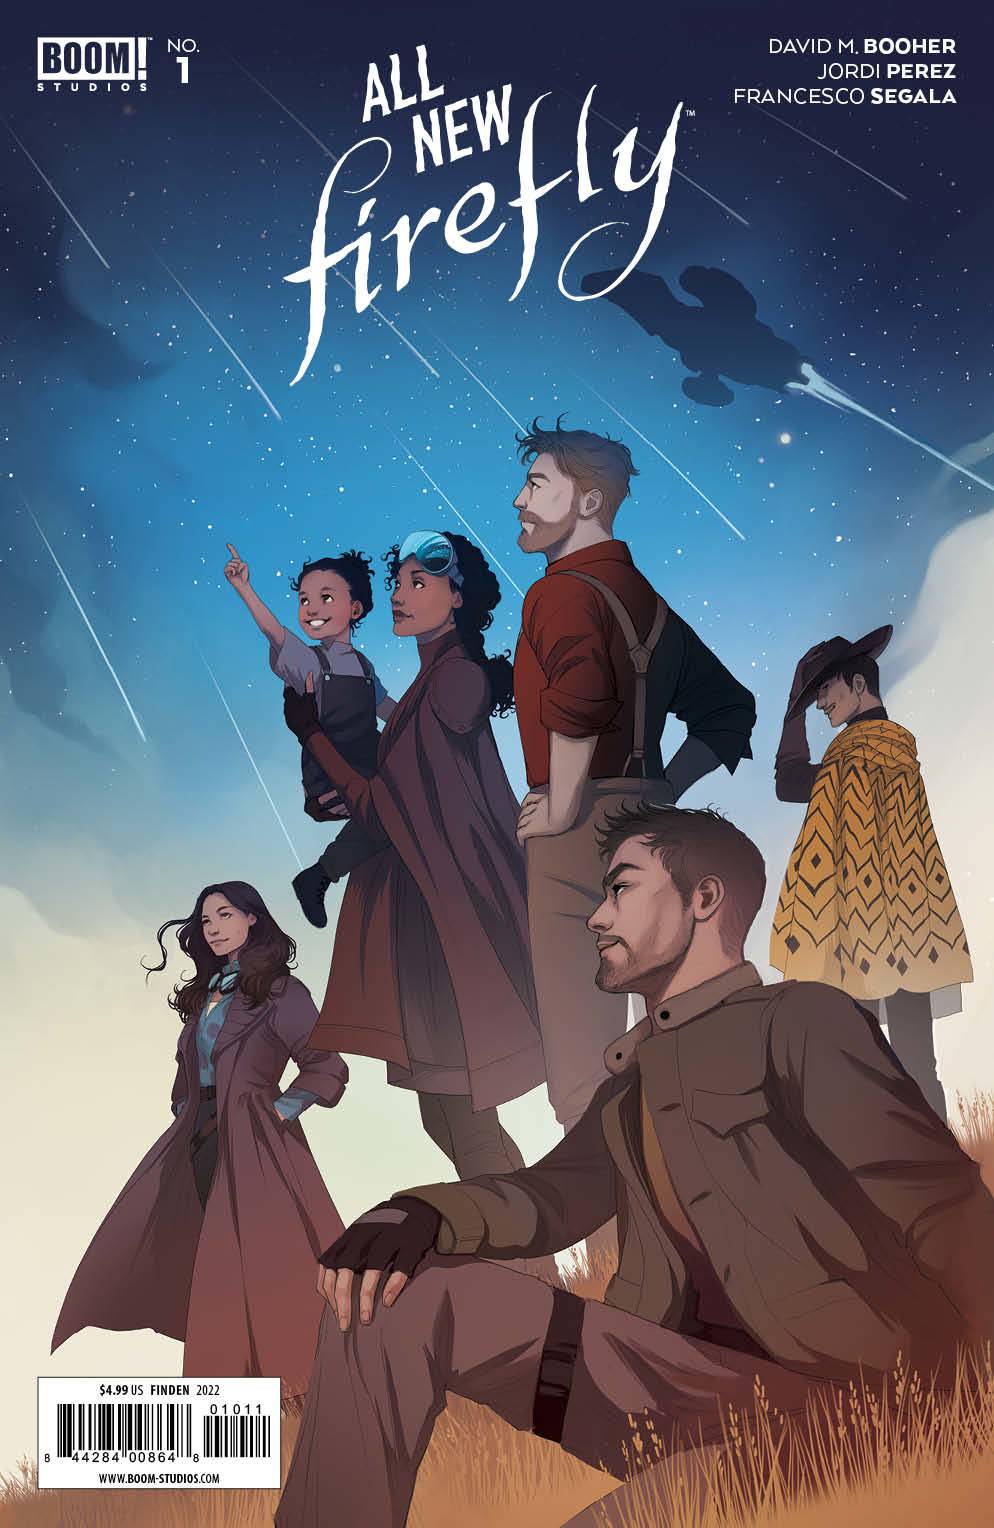 All New Firefly #1 Cover A Finden